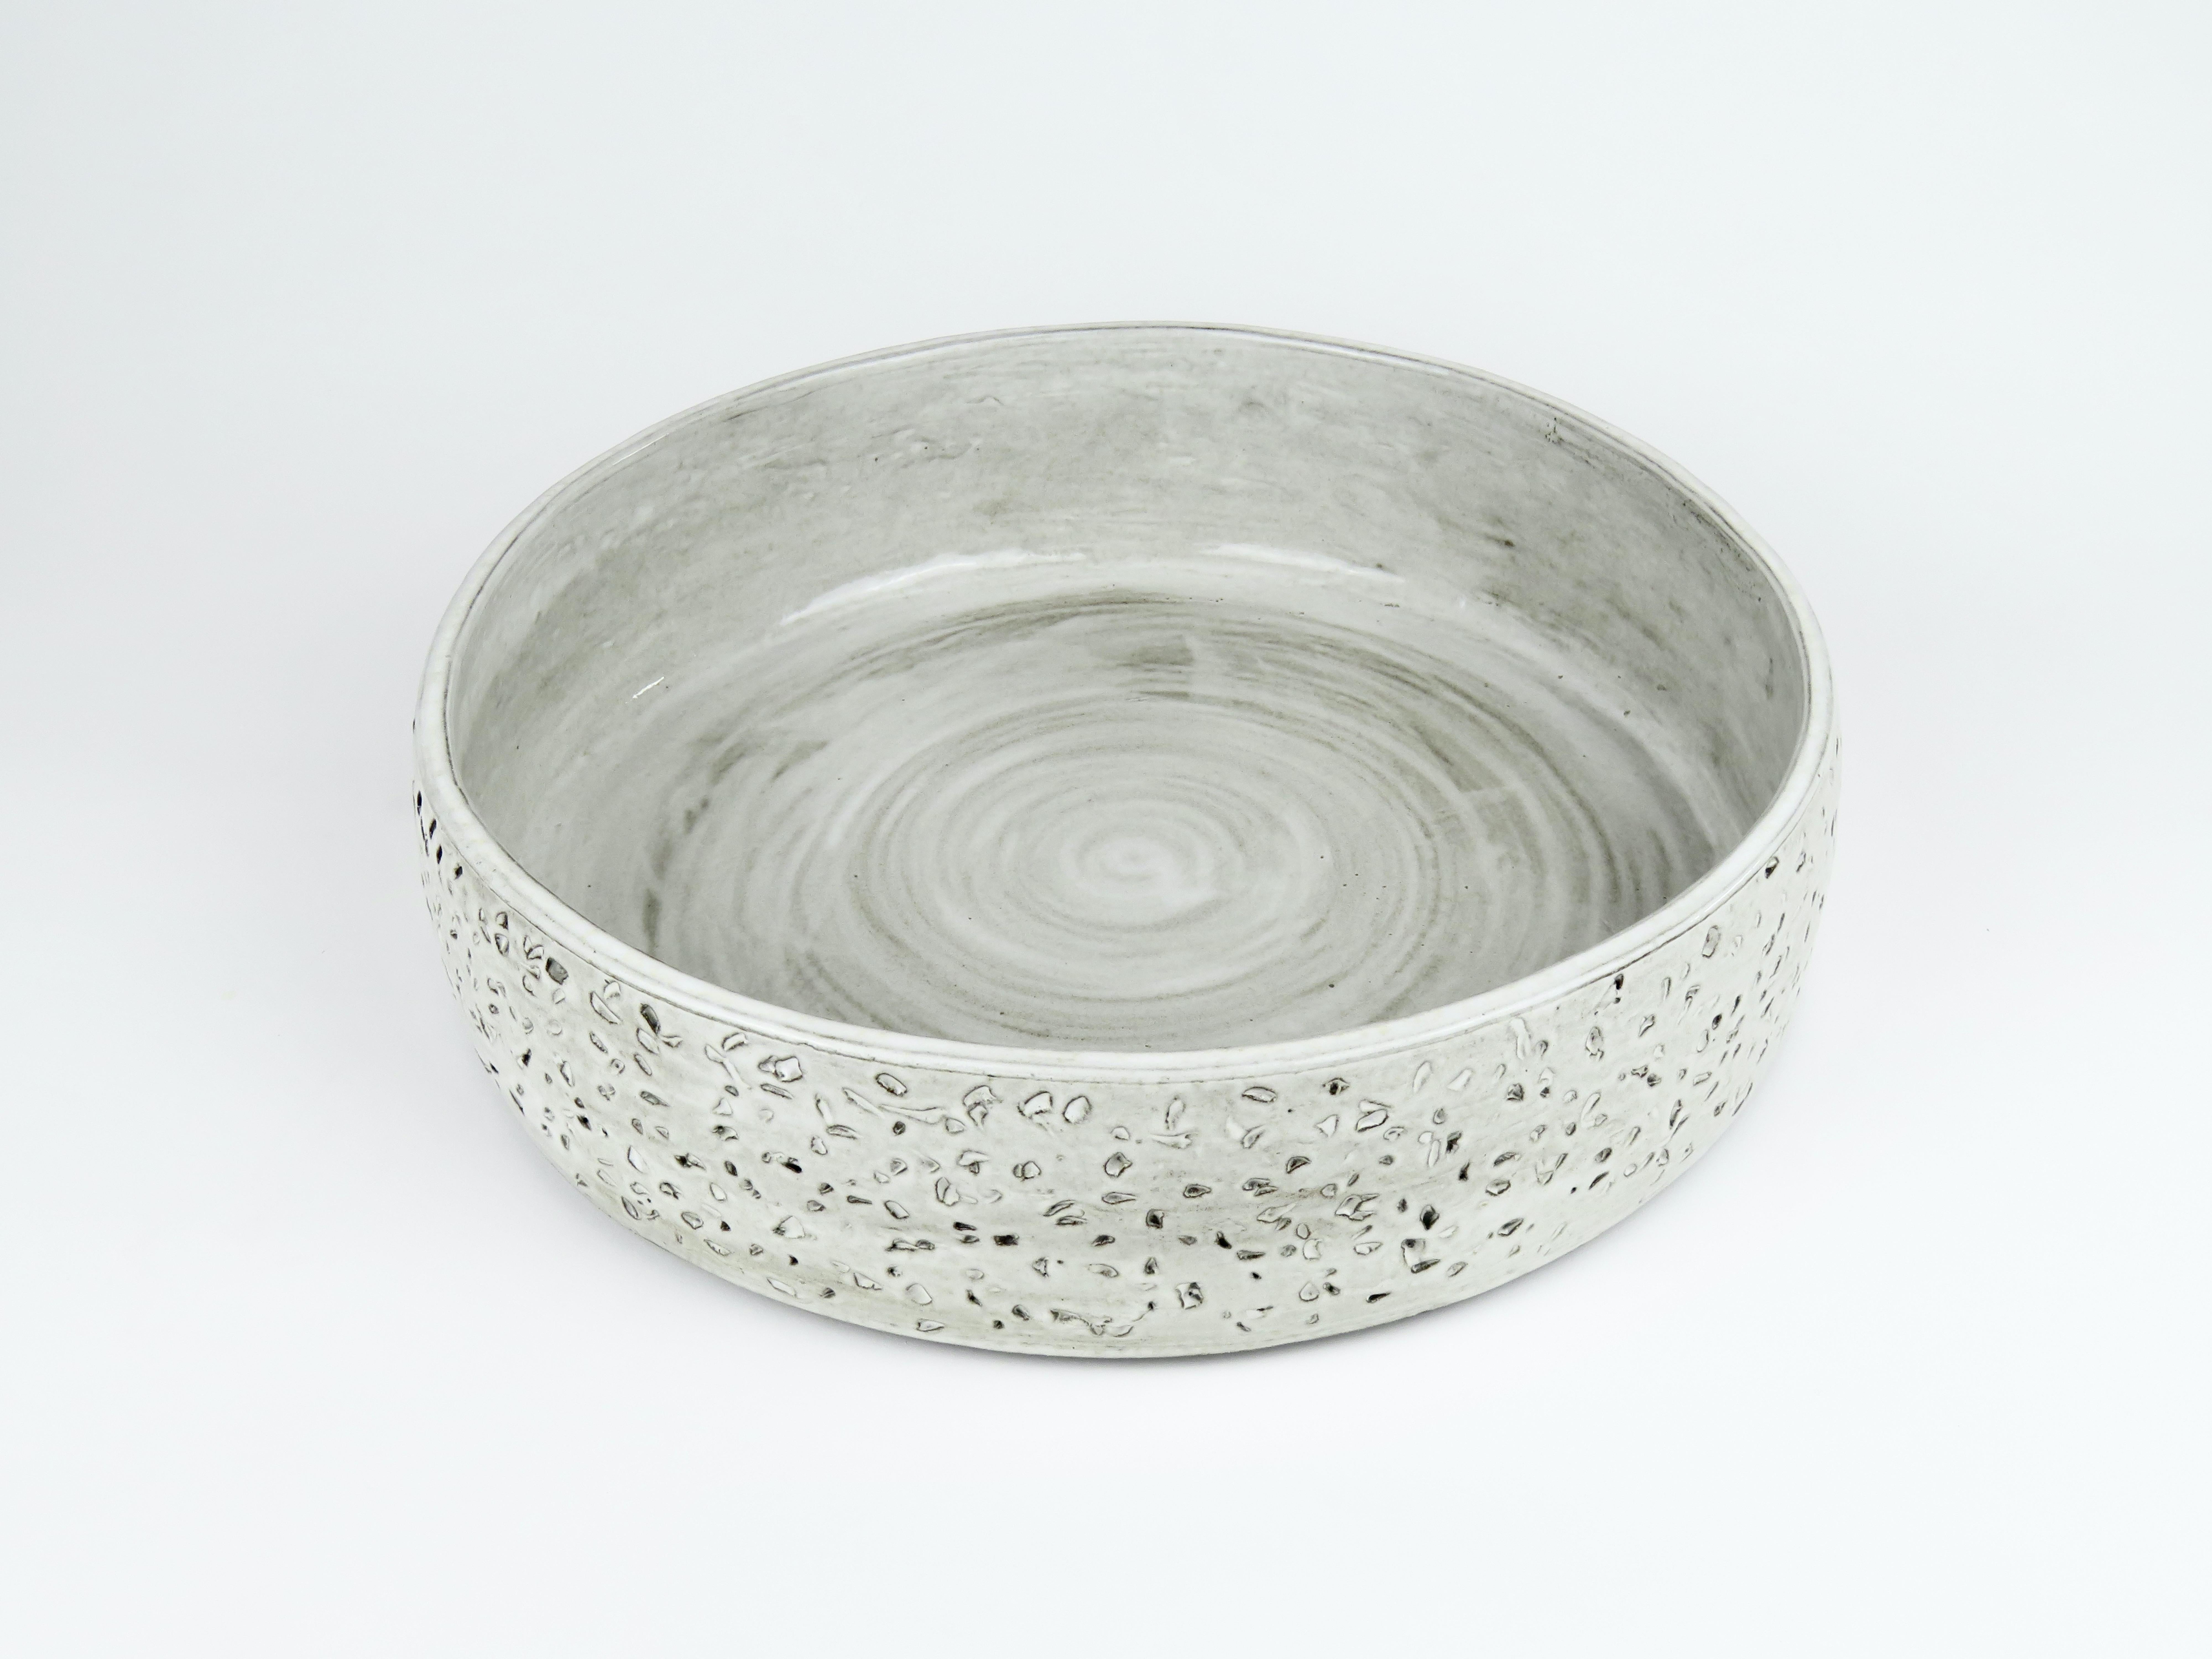 Hand-Carved Large Flat Serving Bowl, Hand Carved Exterior In Off-White Glaze, Ceramic For Sale